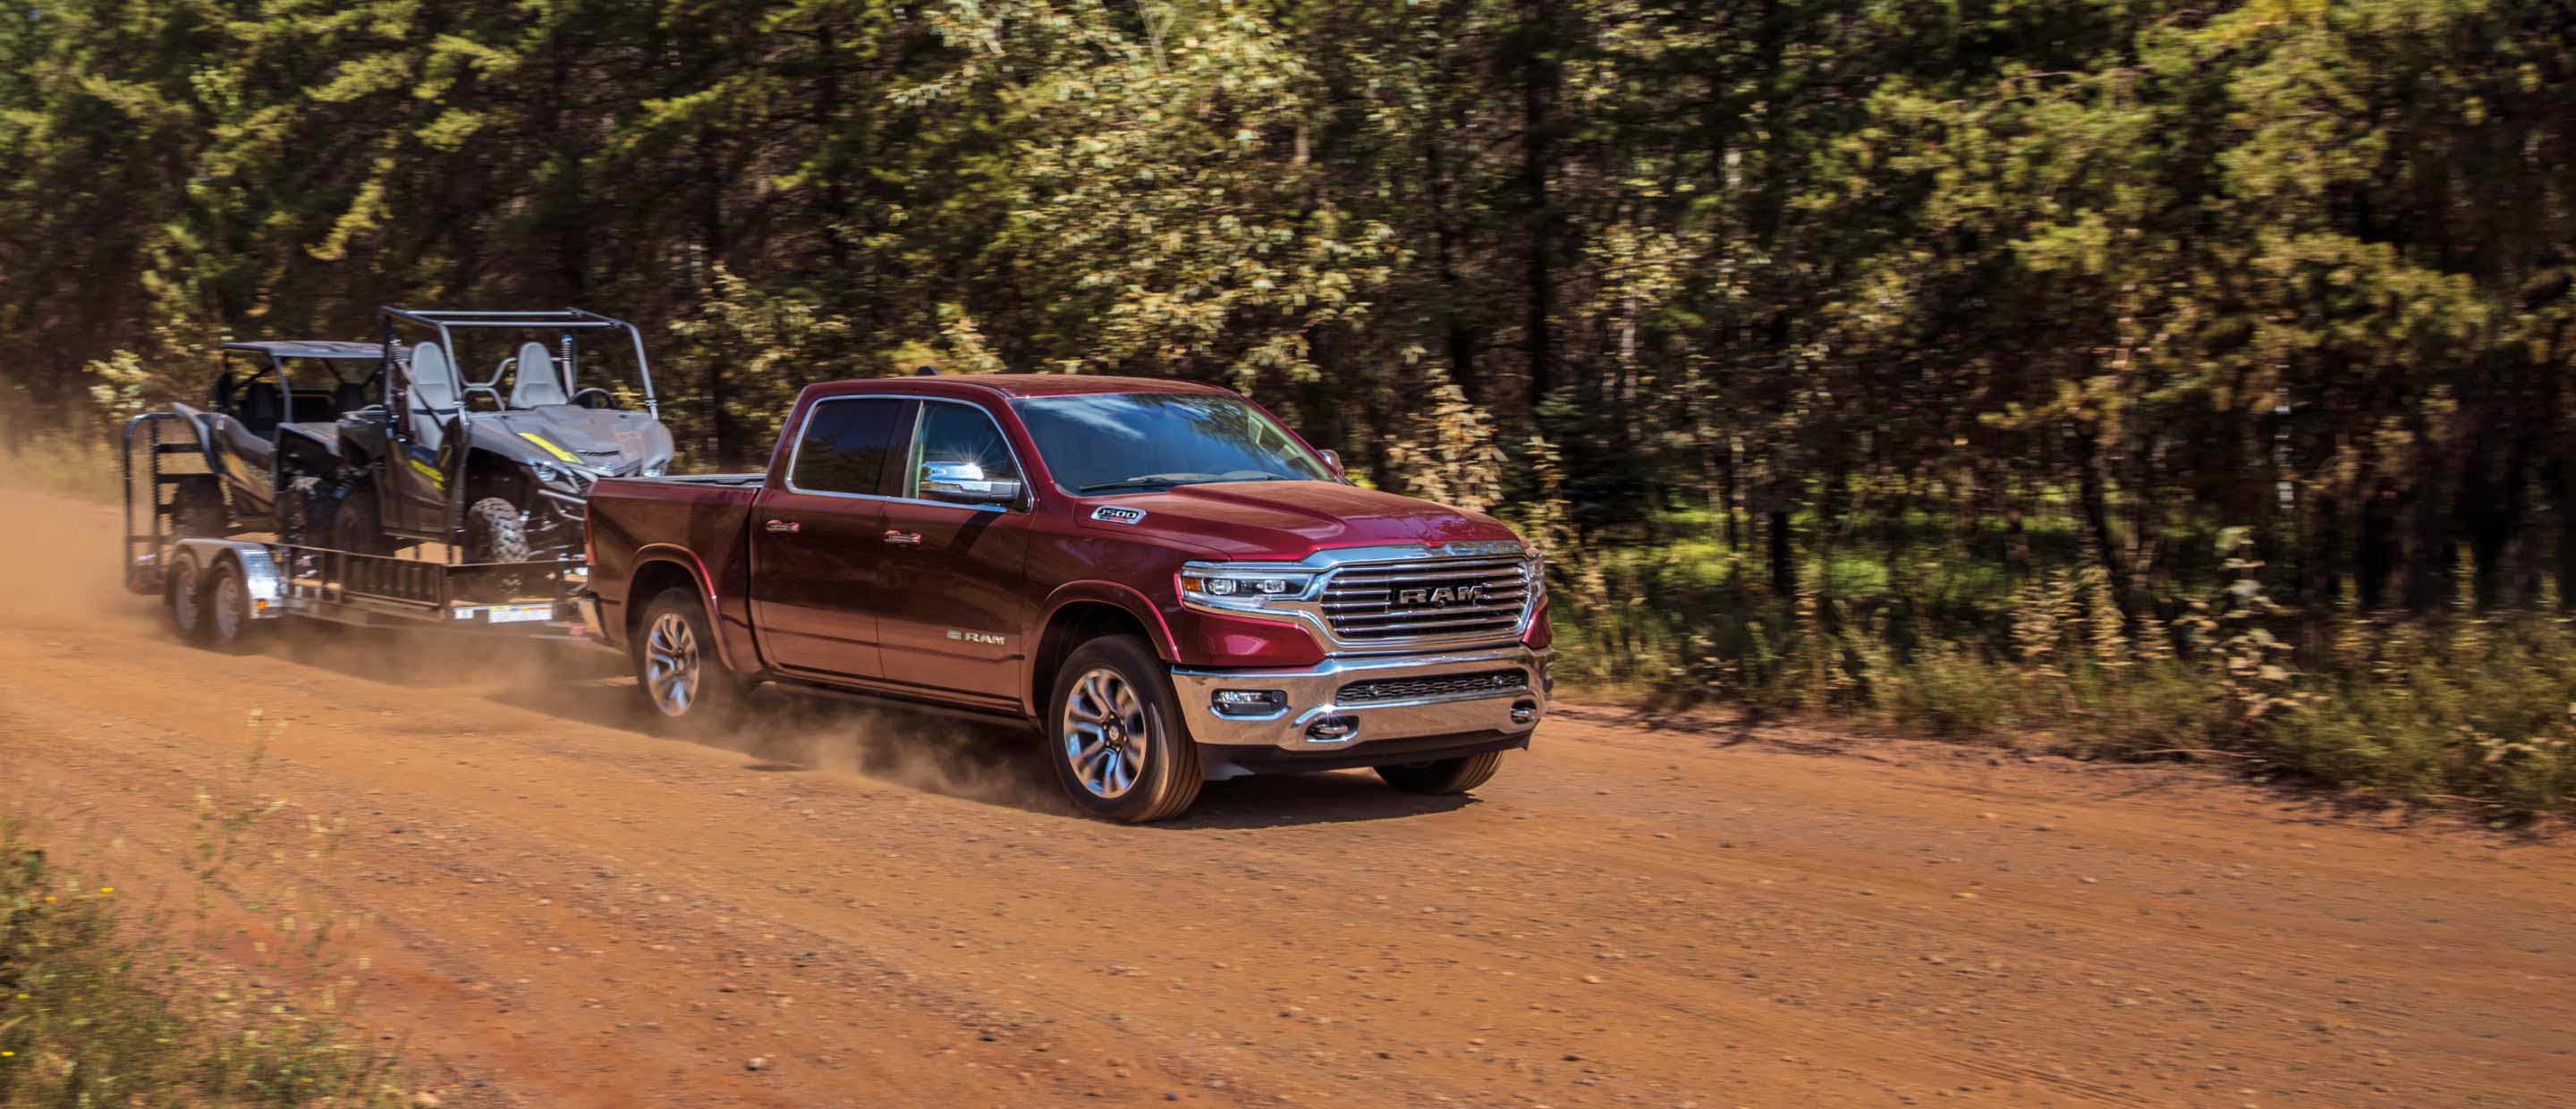 The 2022 Ram 1500 towing a flatbed carrying a pair of all-terrain vehicles.